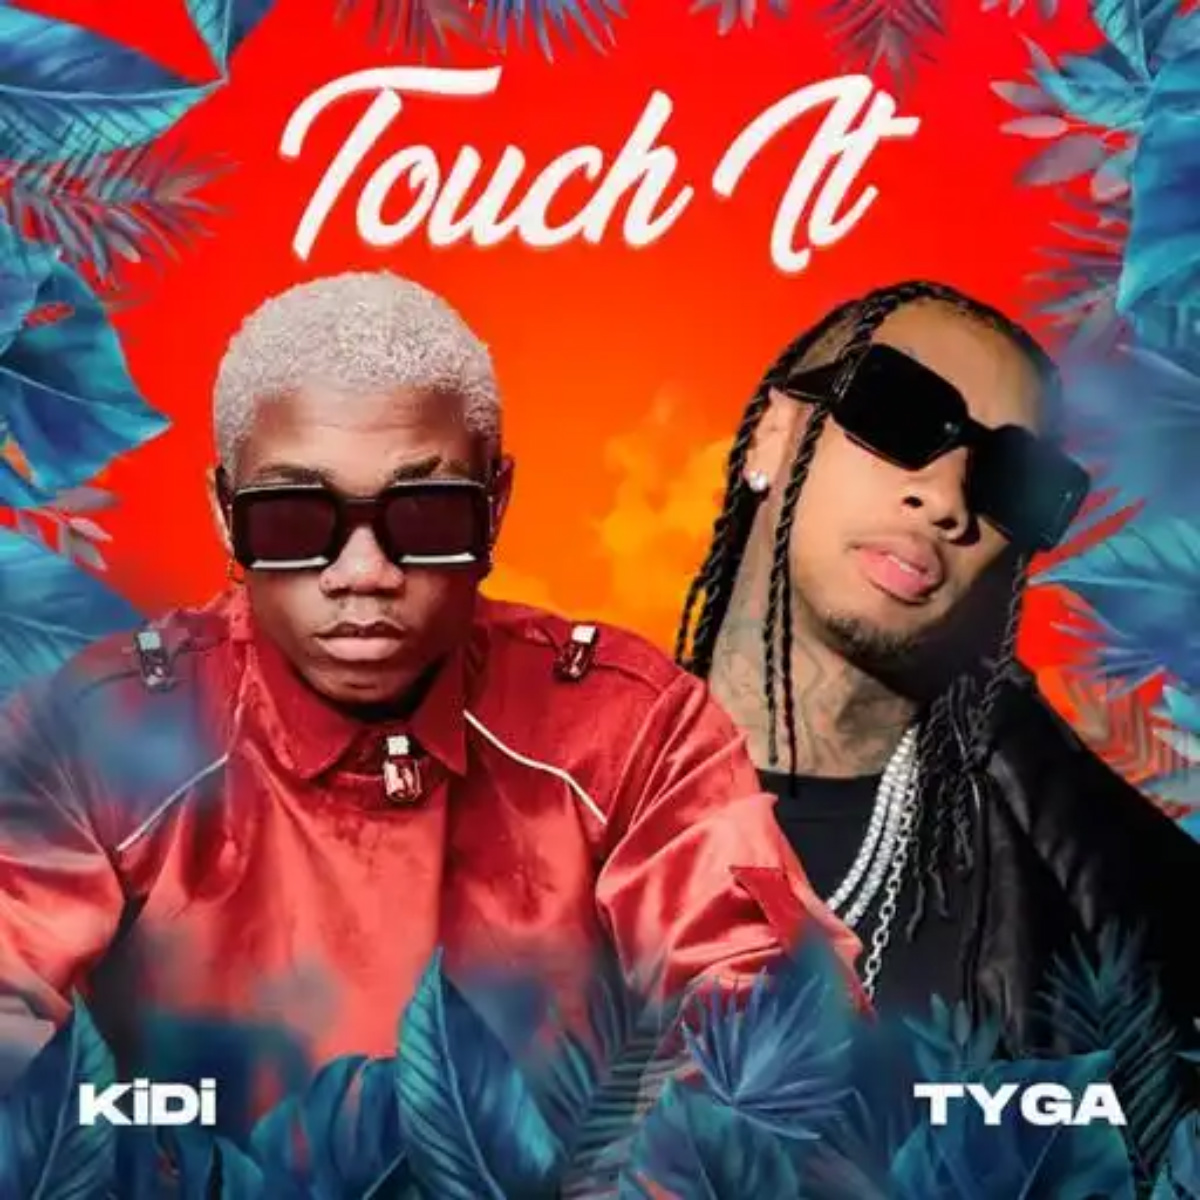 Touch It (Remix) by KiDi feat. Tyga